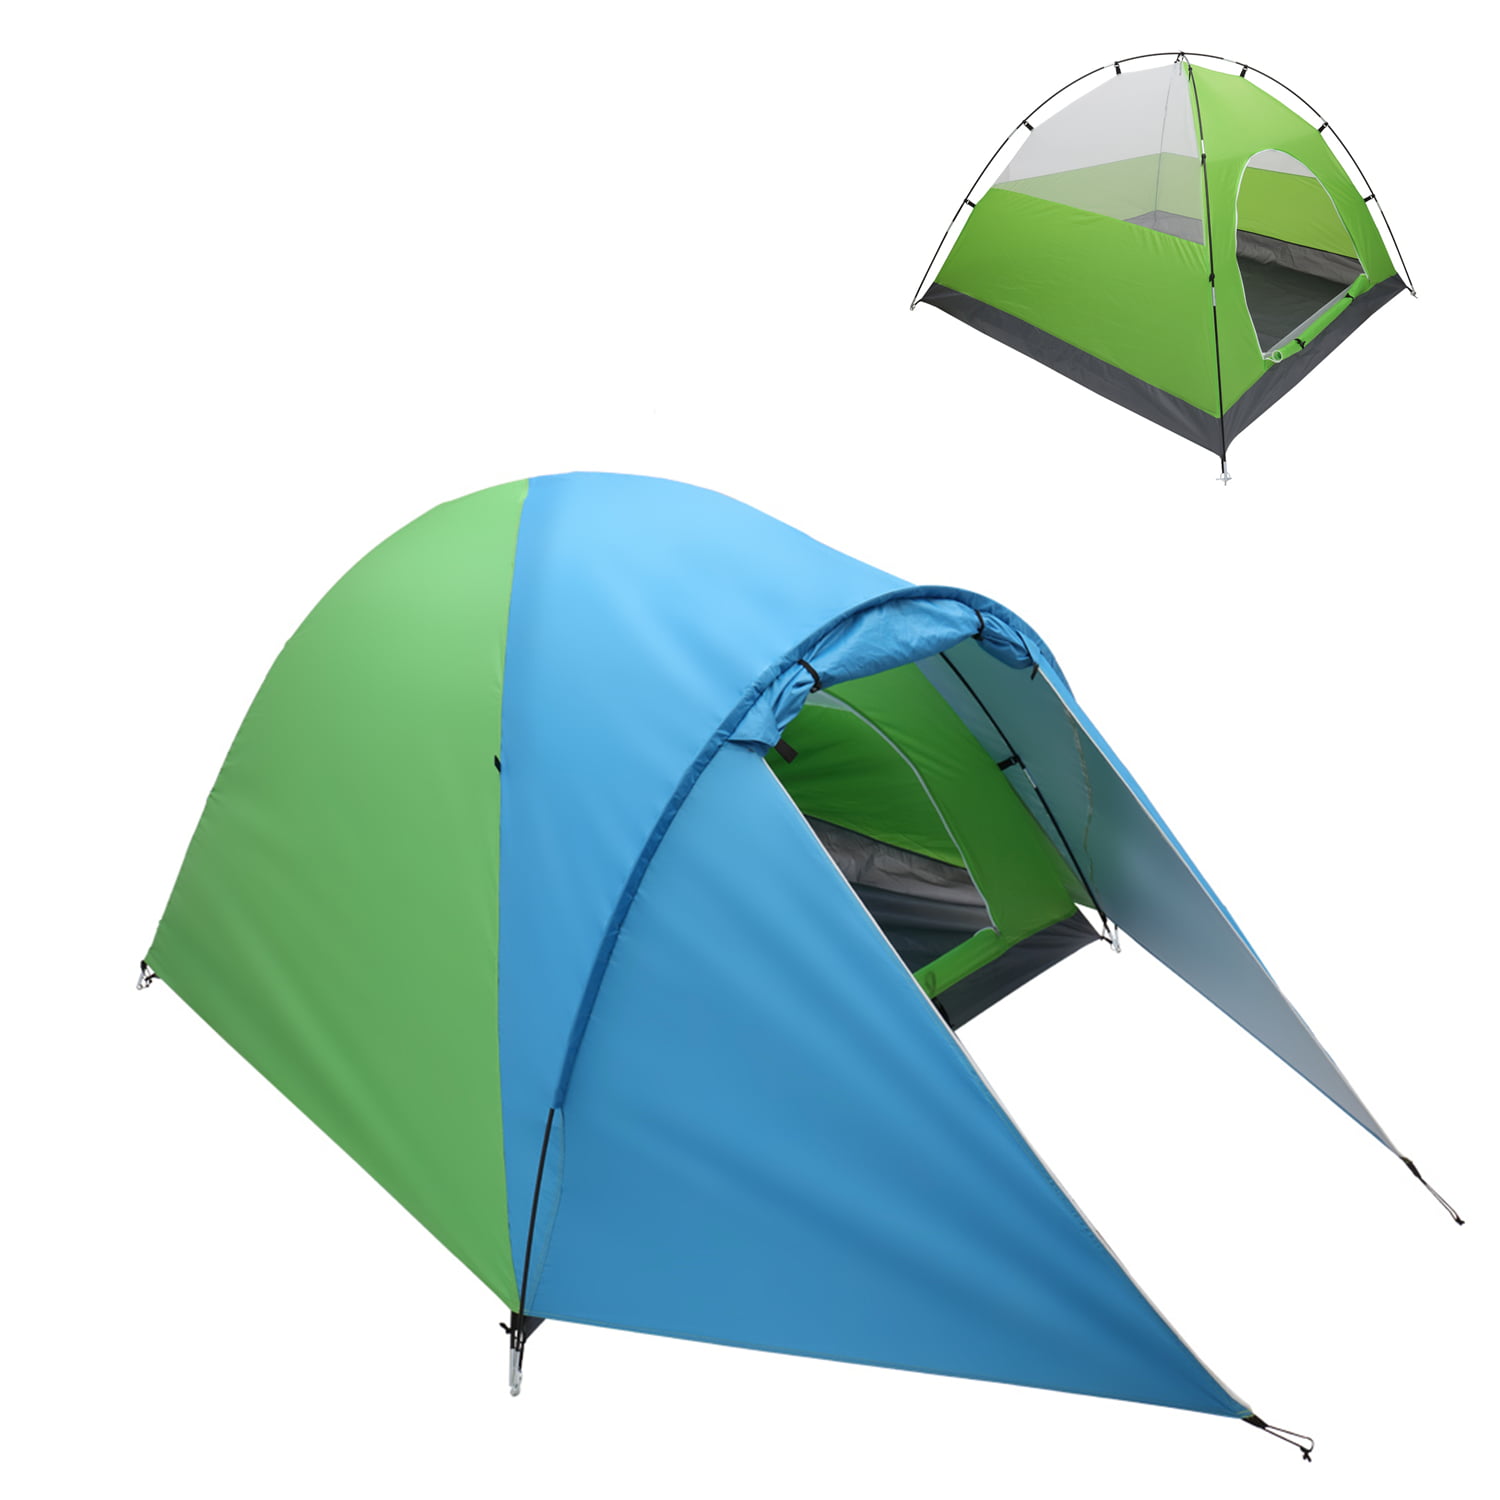 COFFEE One size KingCamp Unisexs Camping Tent